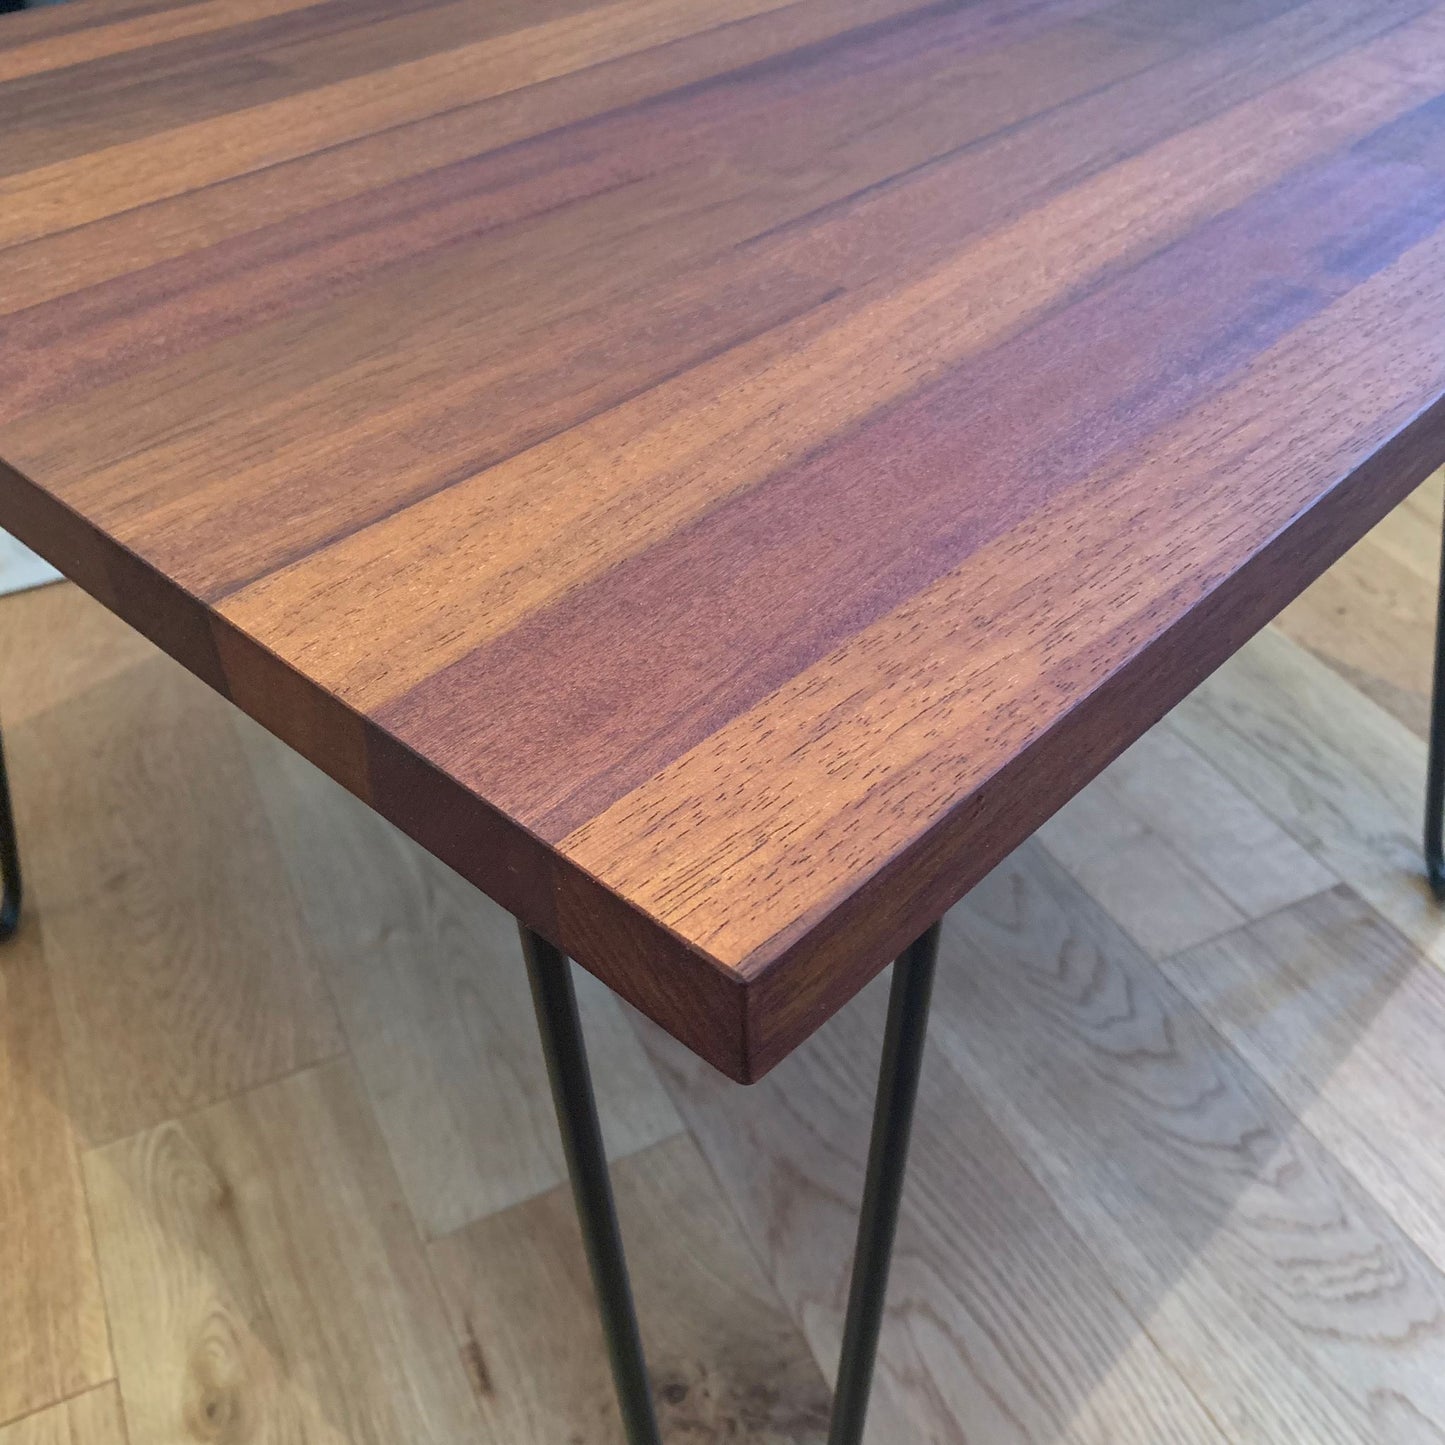 Hardwood Iroko/Sapele Coffee Tables with Hairpin Legs | Made to Order